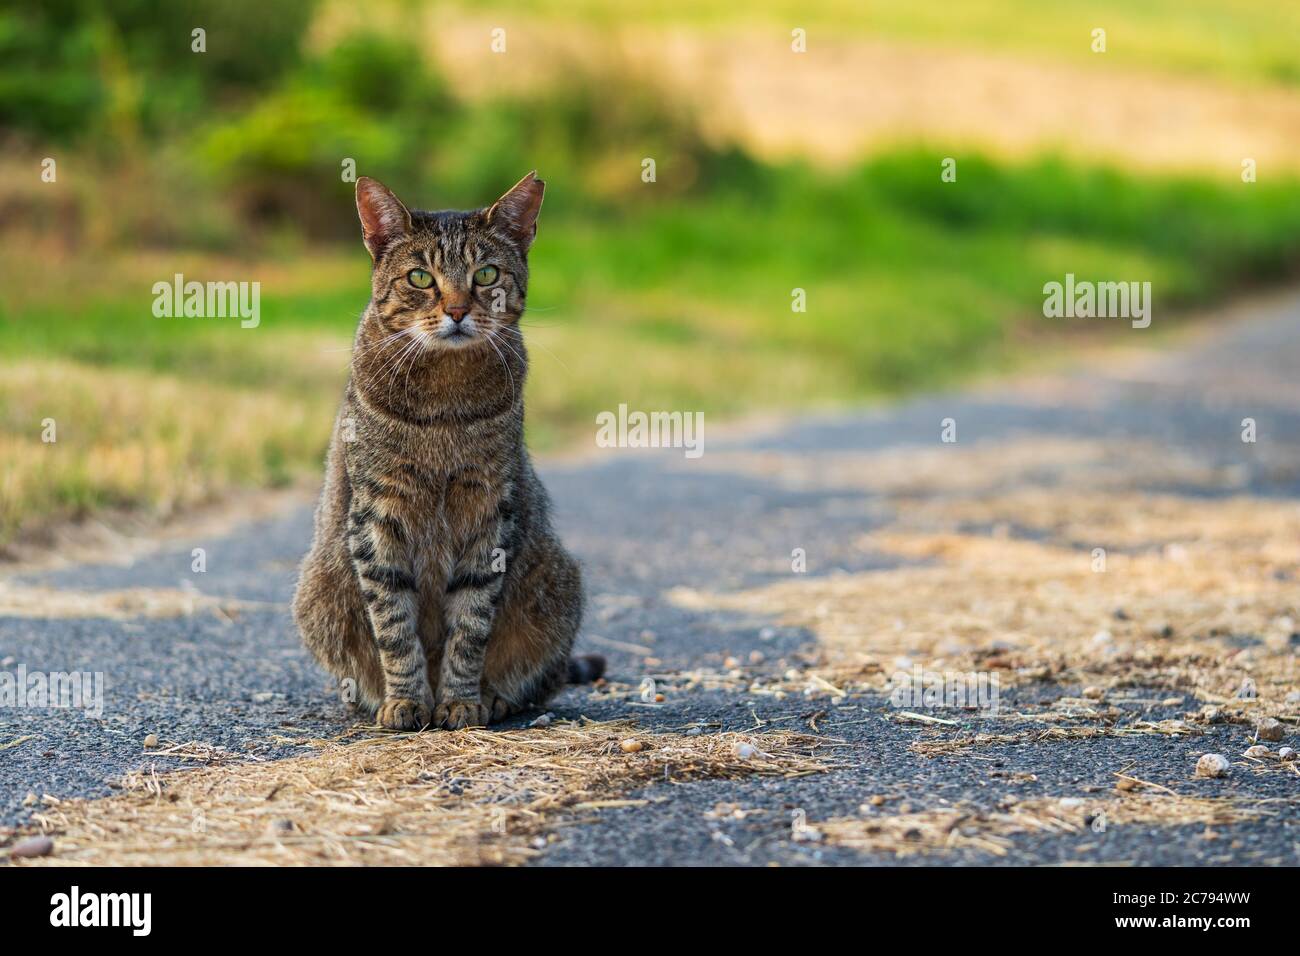 Portrait of a cute stray cat (European Shorthair) with bright green eyes and a bitten ear sitting on a rural street, looking curiously at the camera Stock Photo